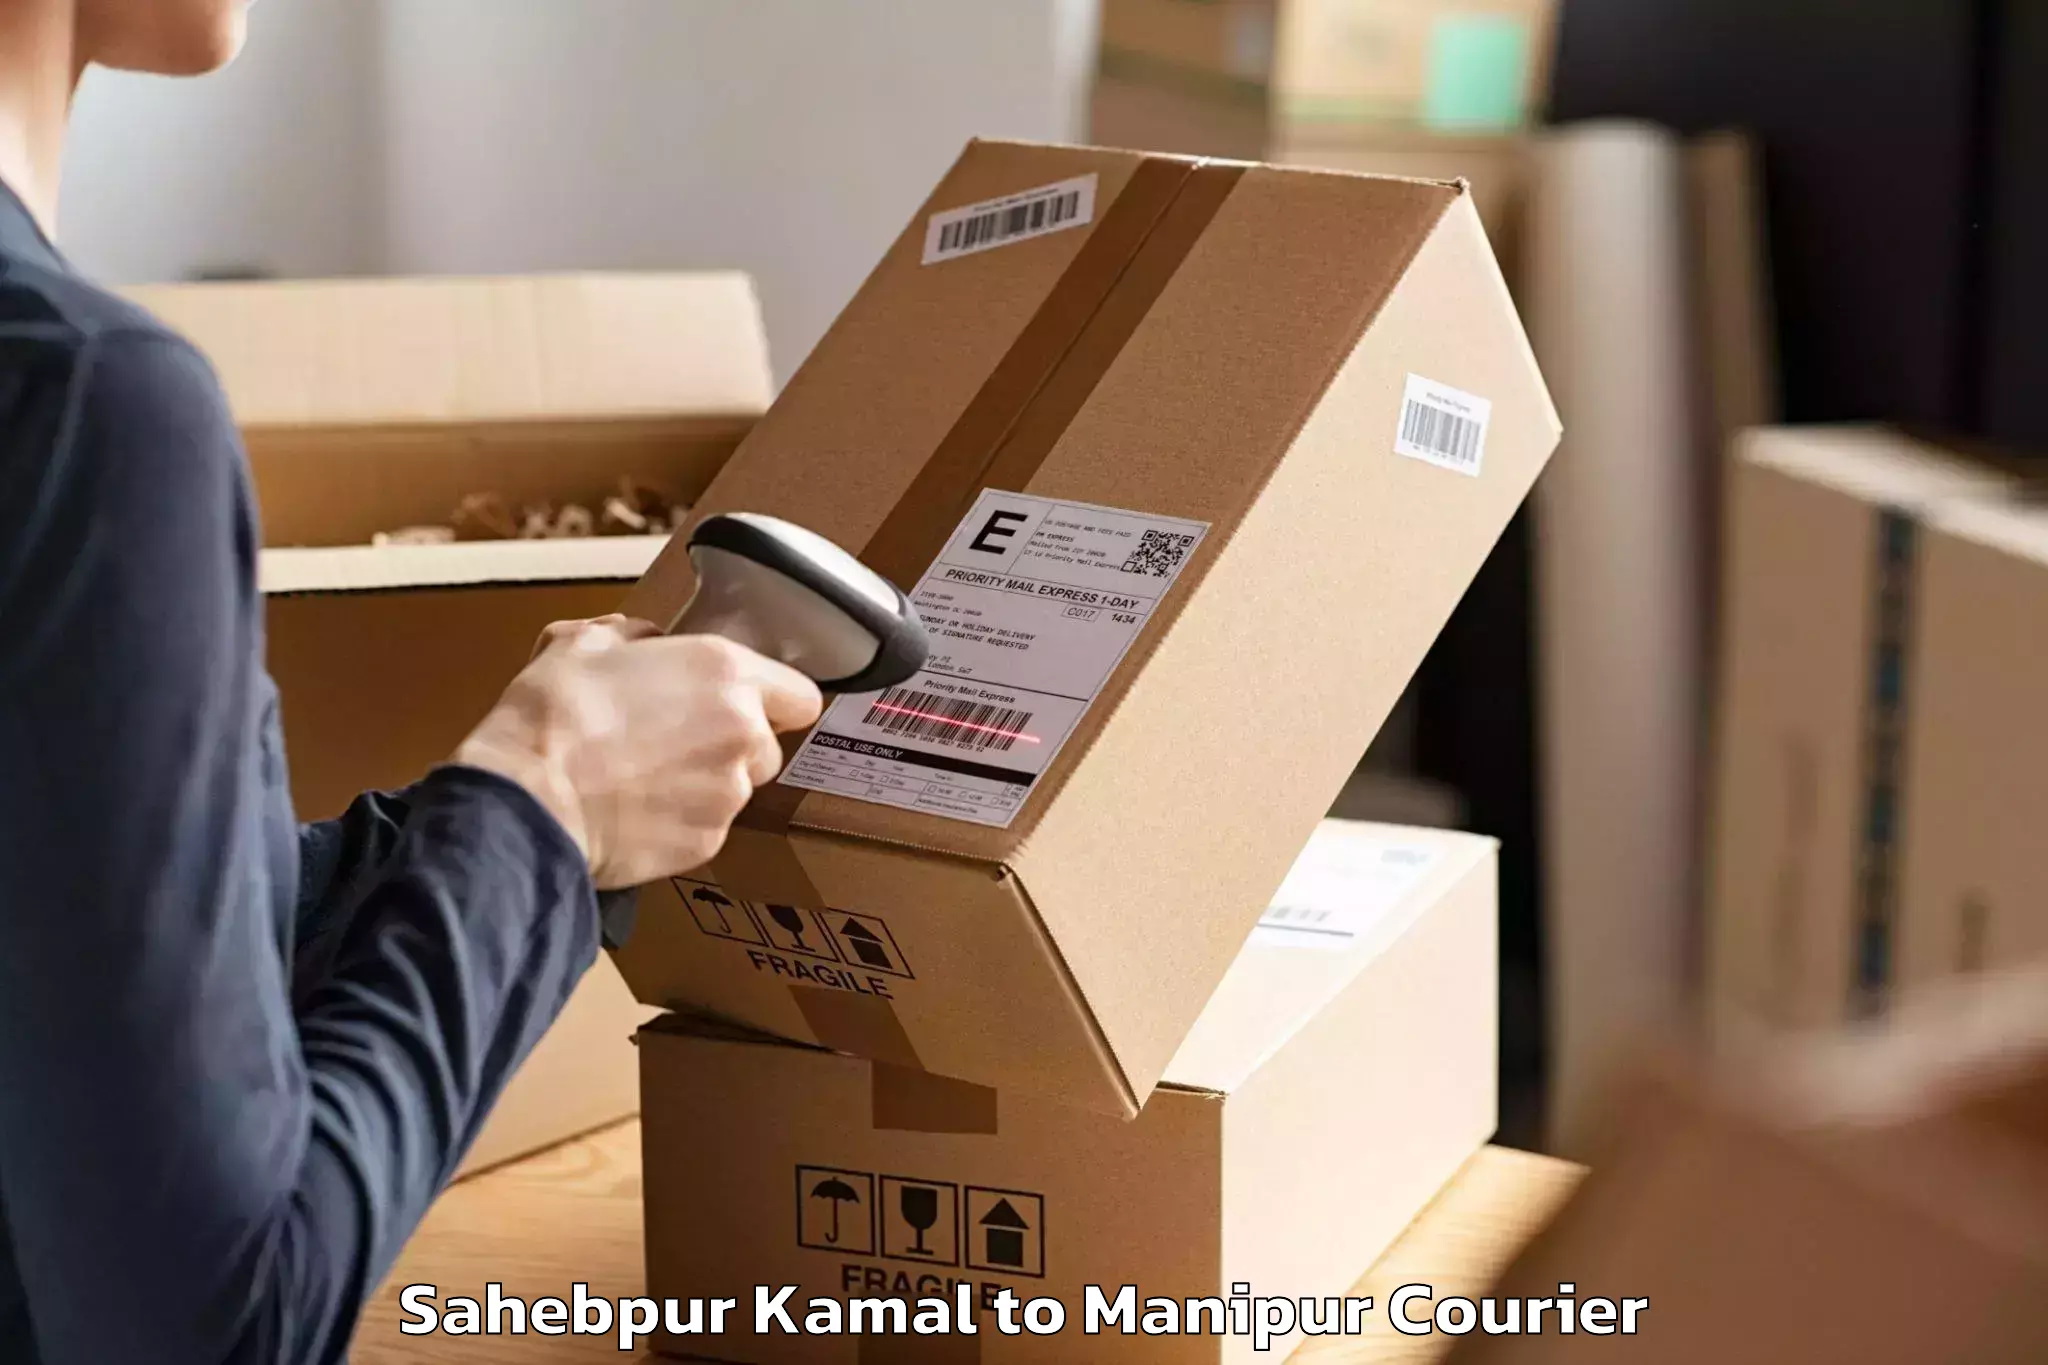 Professional movers and packers Sahebpur Kamal to Imphal